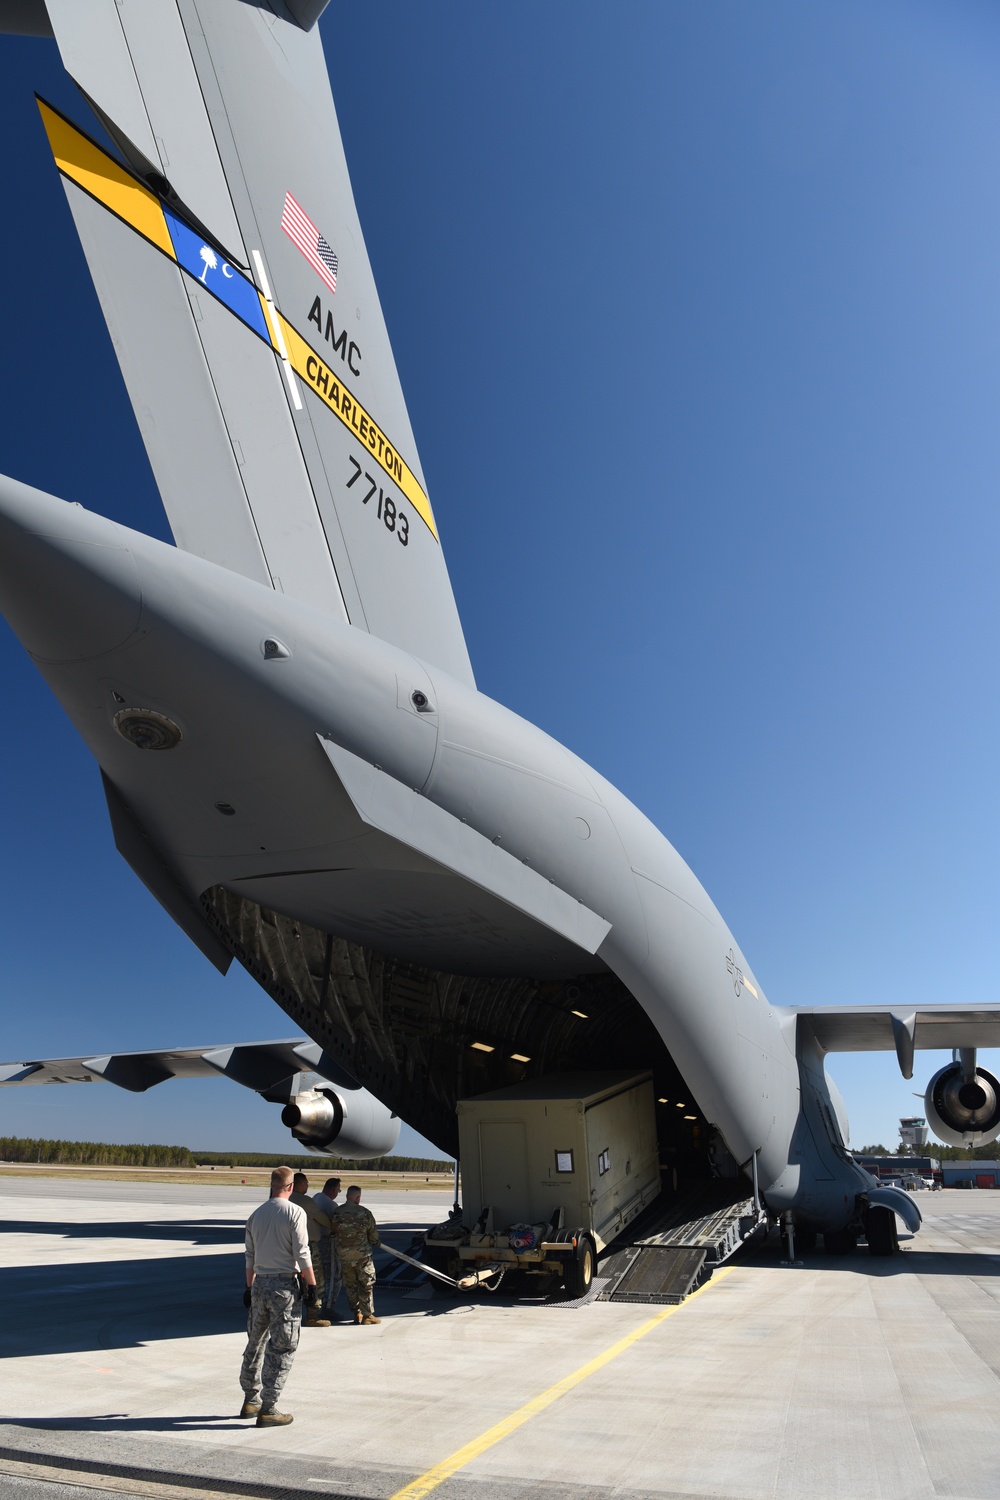 169th Fighter Wing personnel unload cargo in preparation for ACE 19